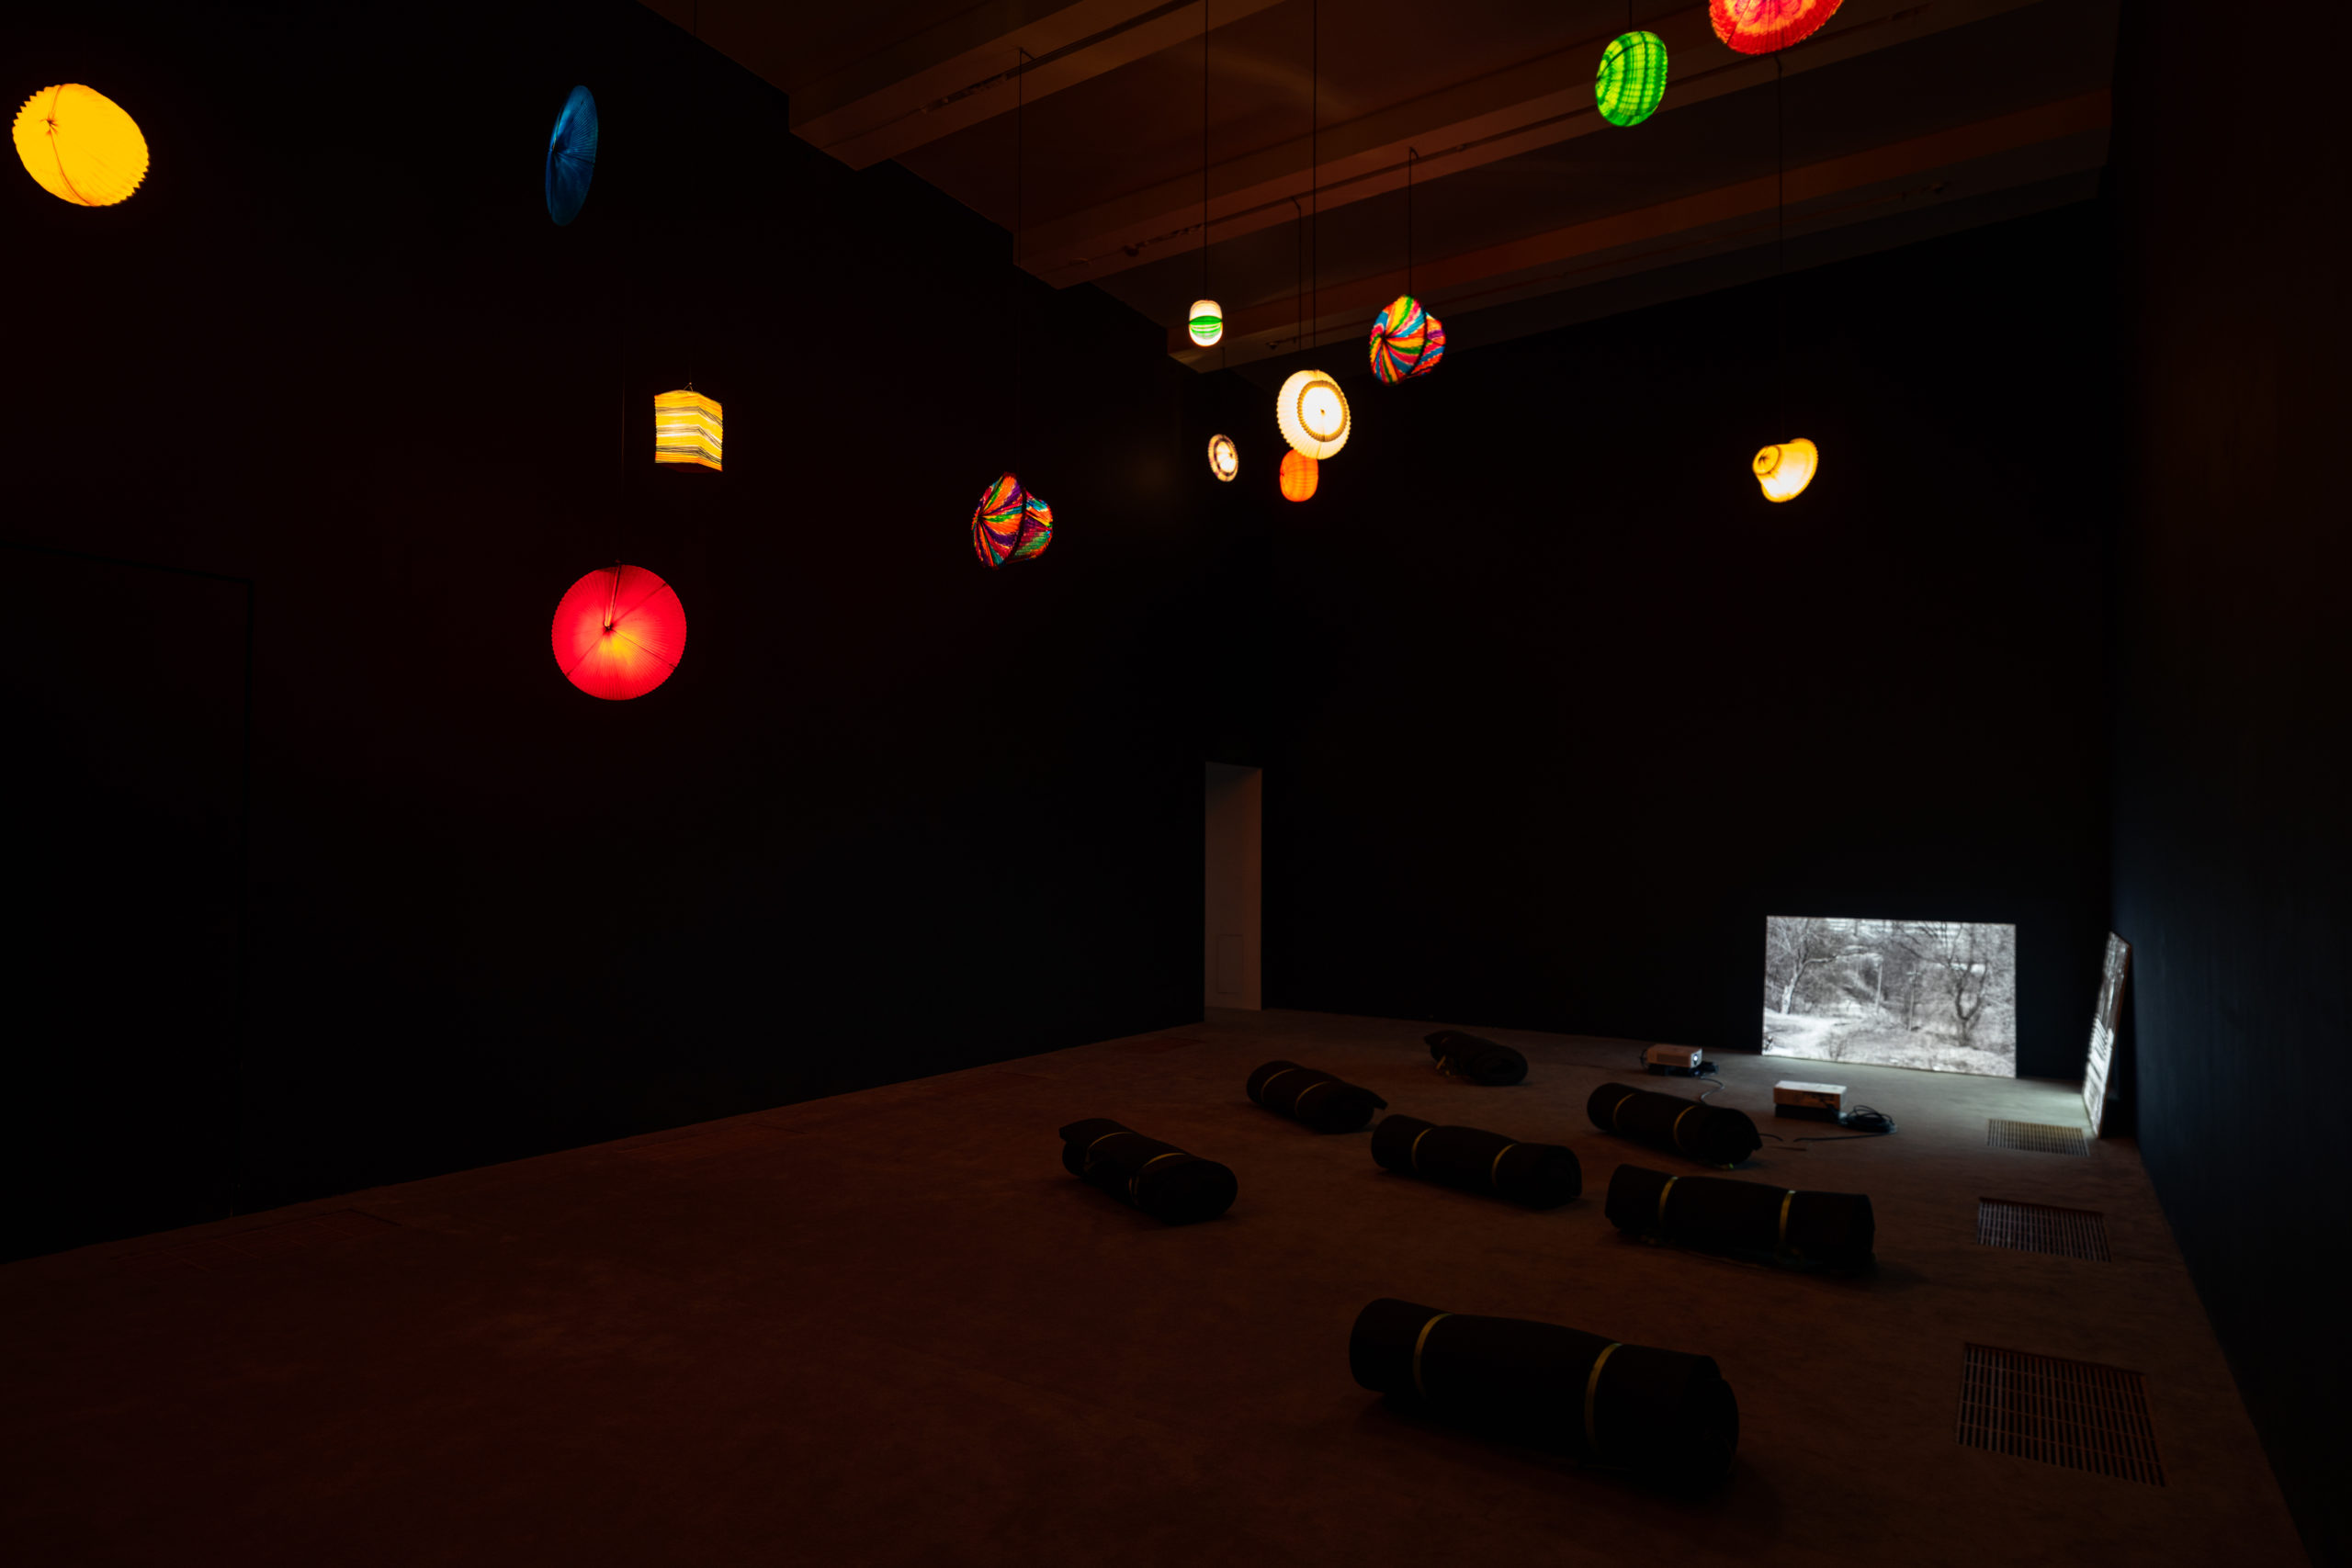 An image of a dark room with thirteen lanterns of different colors dimly lighting the room. Bottom right hand corner black and white images of the outside. Image provided by courtesy of artist.